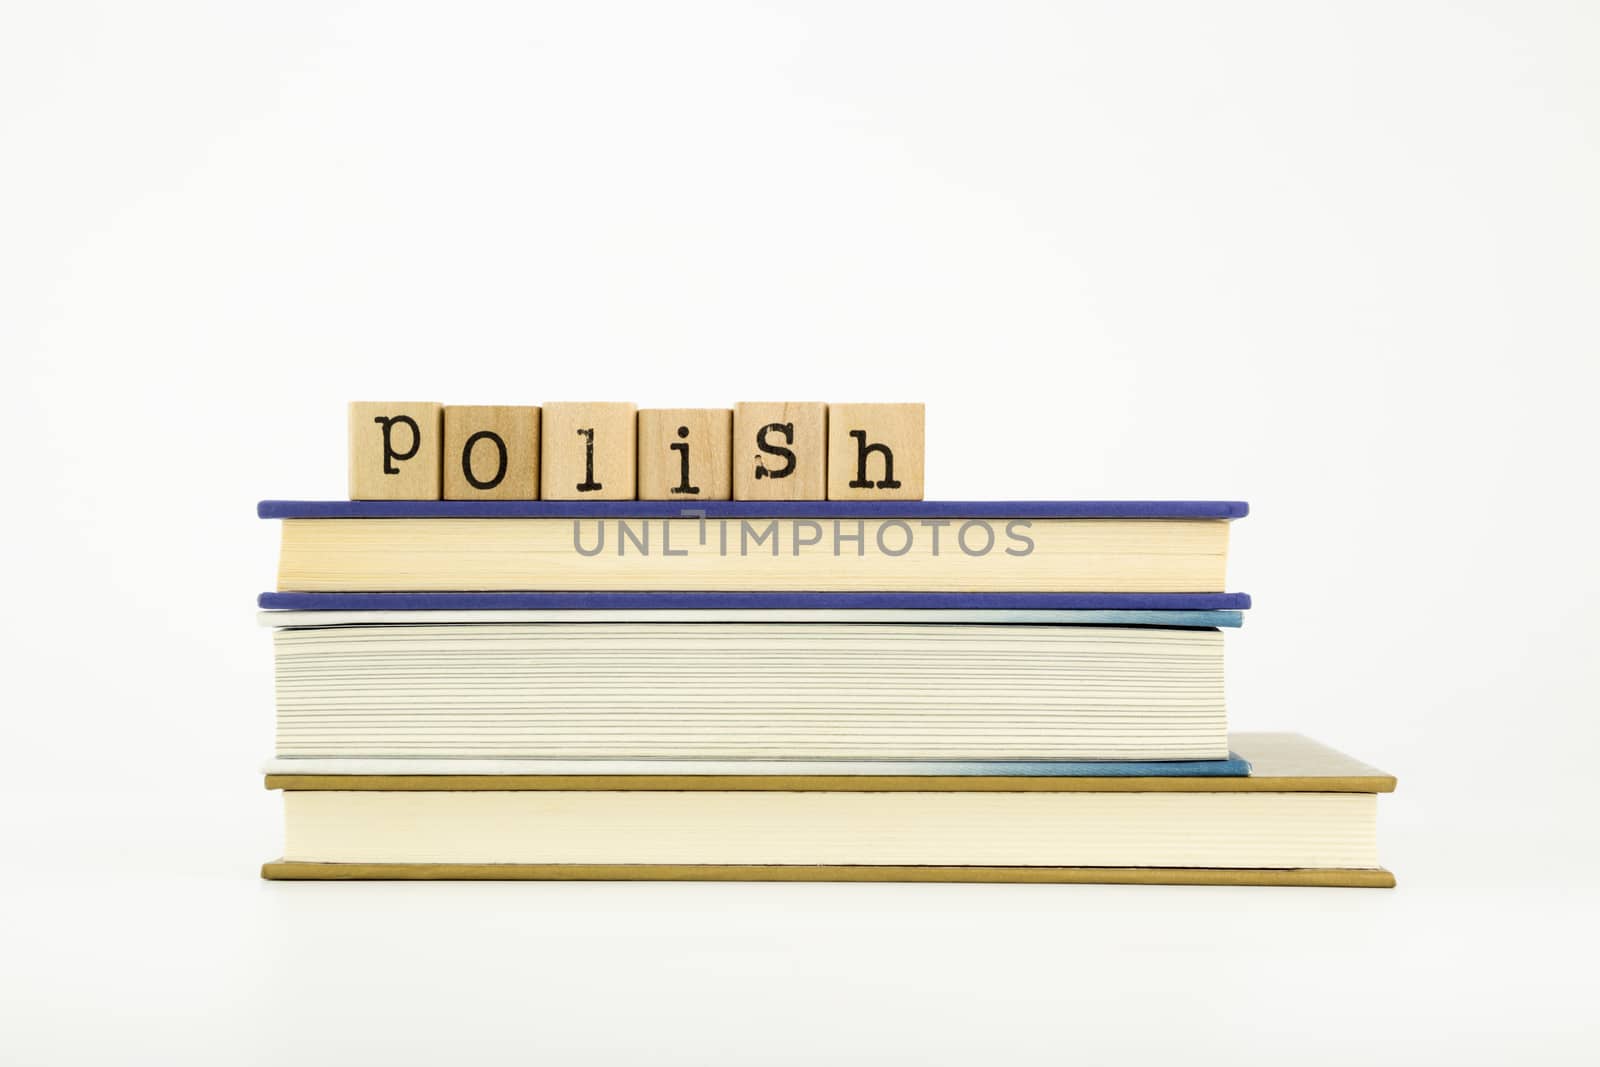 polish language word on wood stamps and books by vinnstock